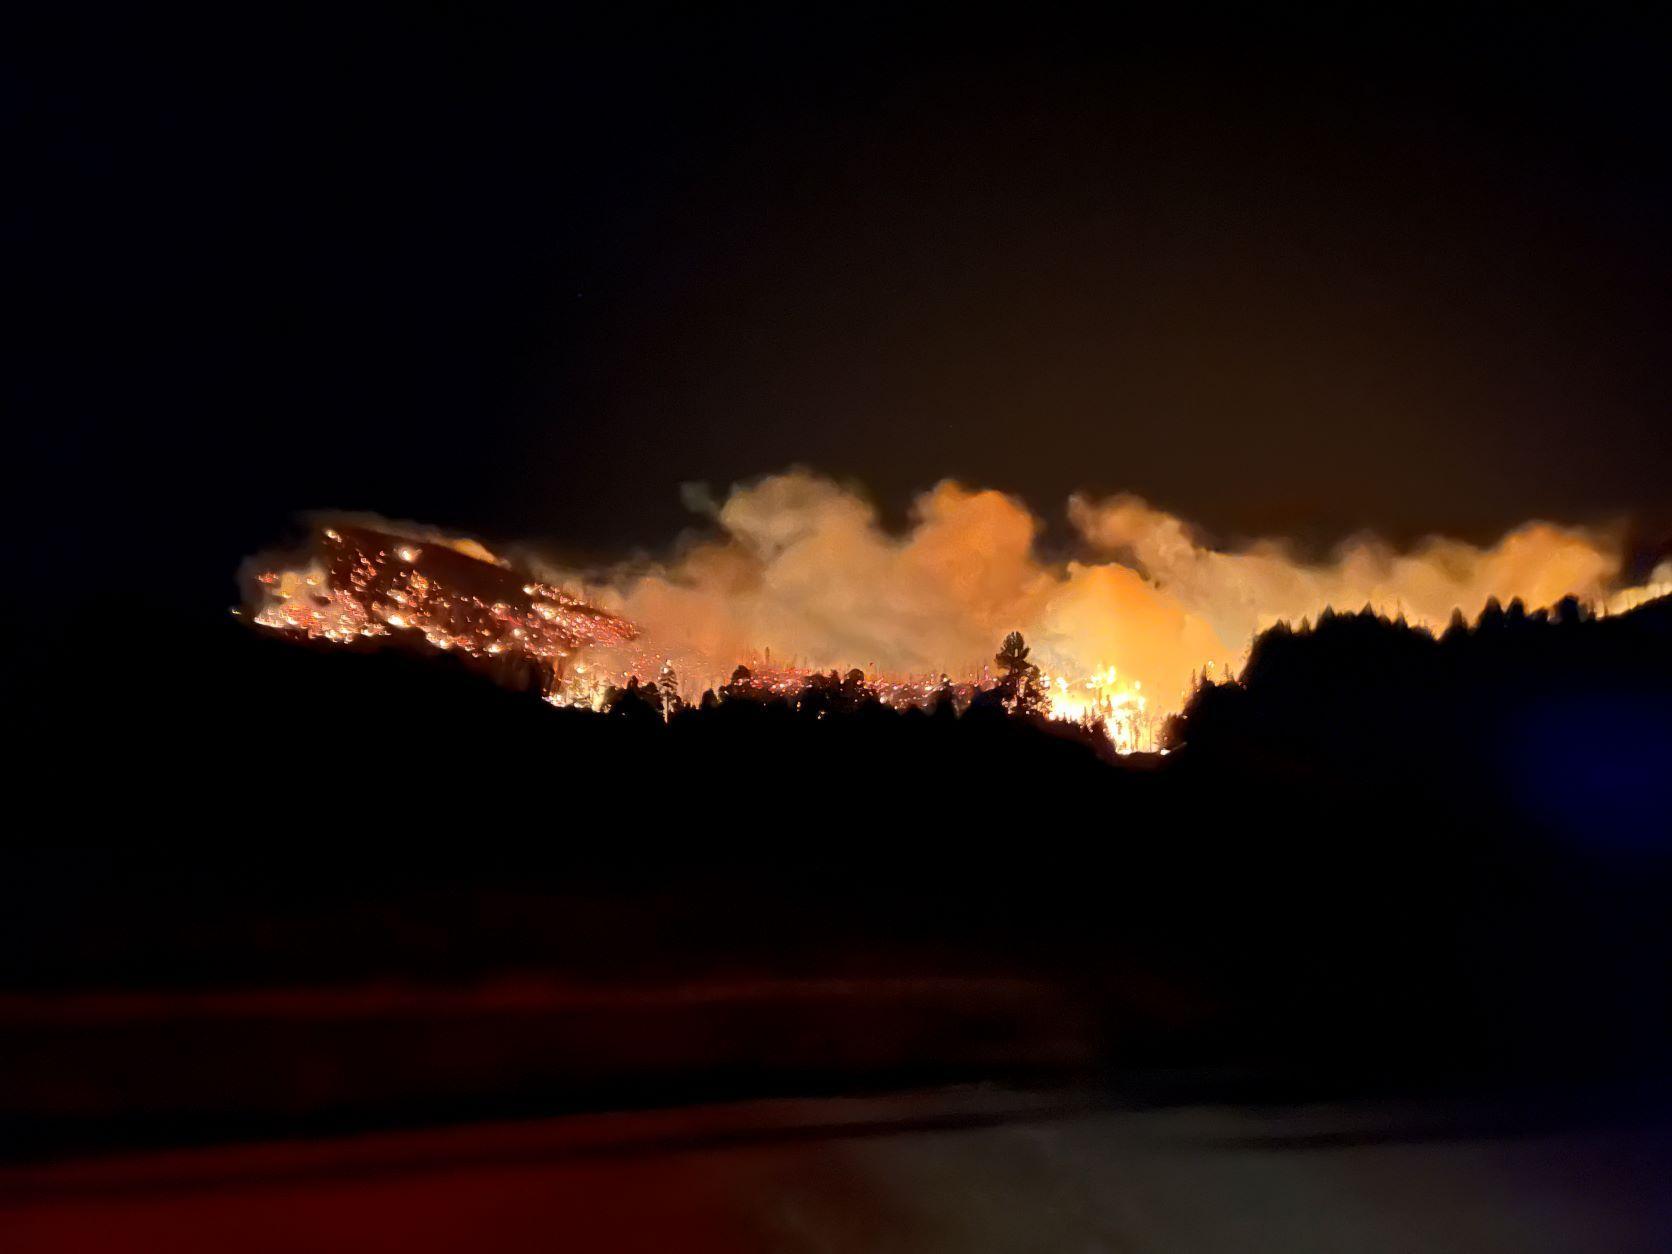 Fire burns at the base of a mountain at night